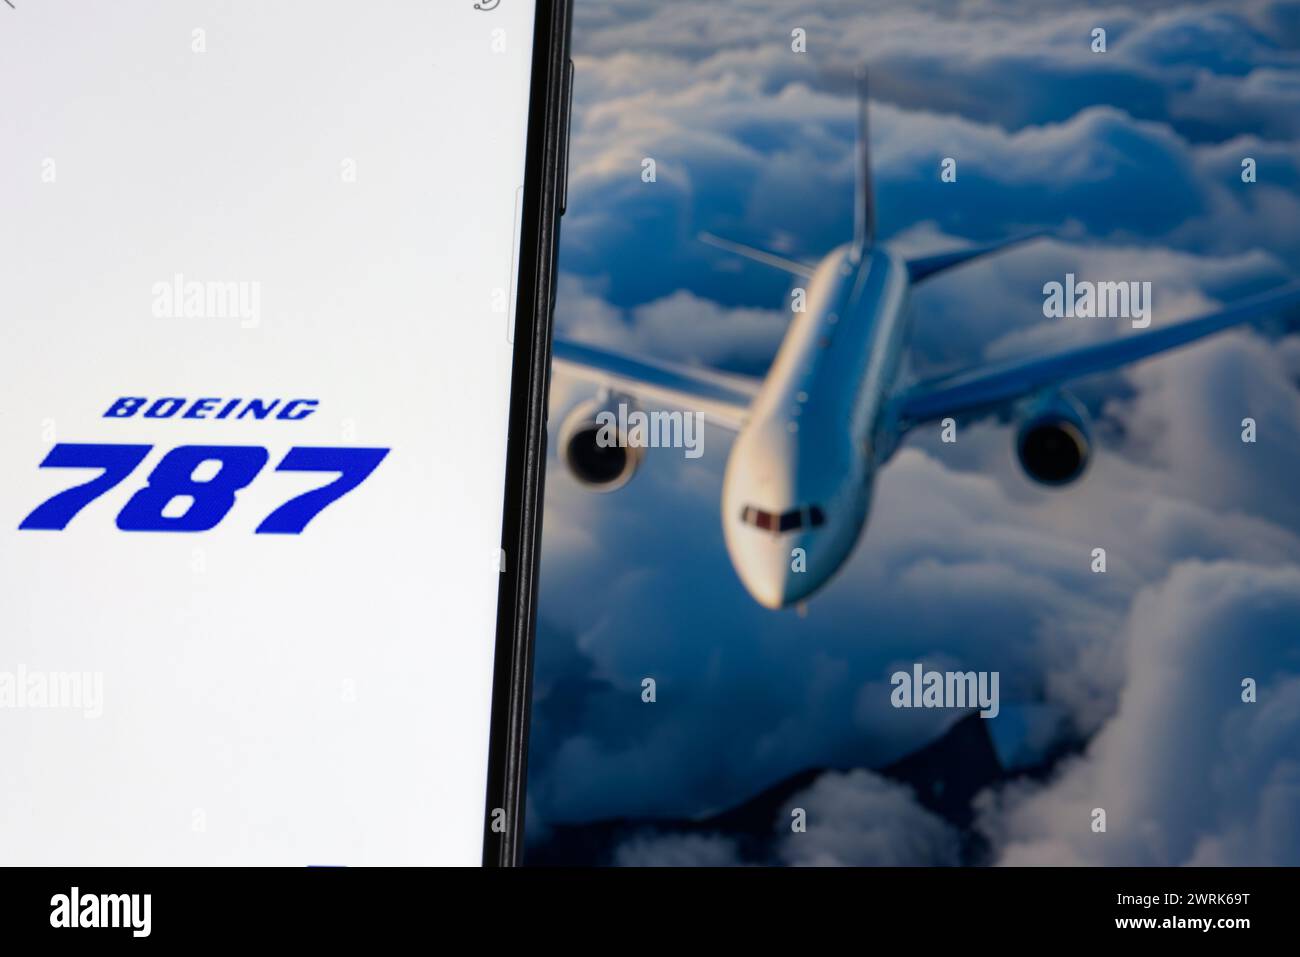 Boeing 787 logo is sharp in the foreground, while flying airplane is blurred in the background. Stock Photo